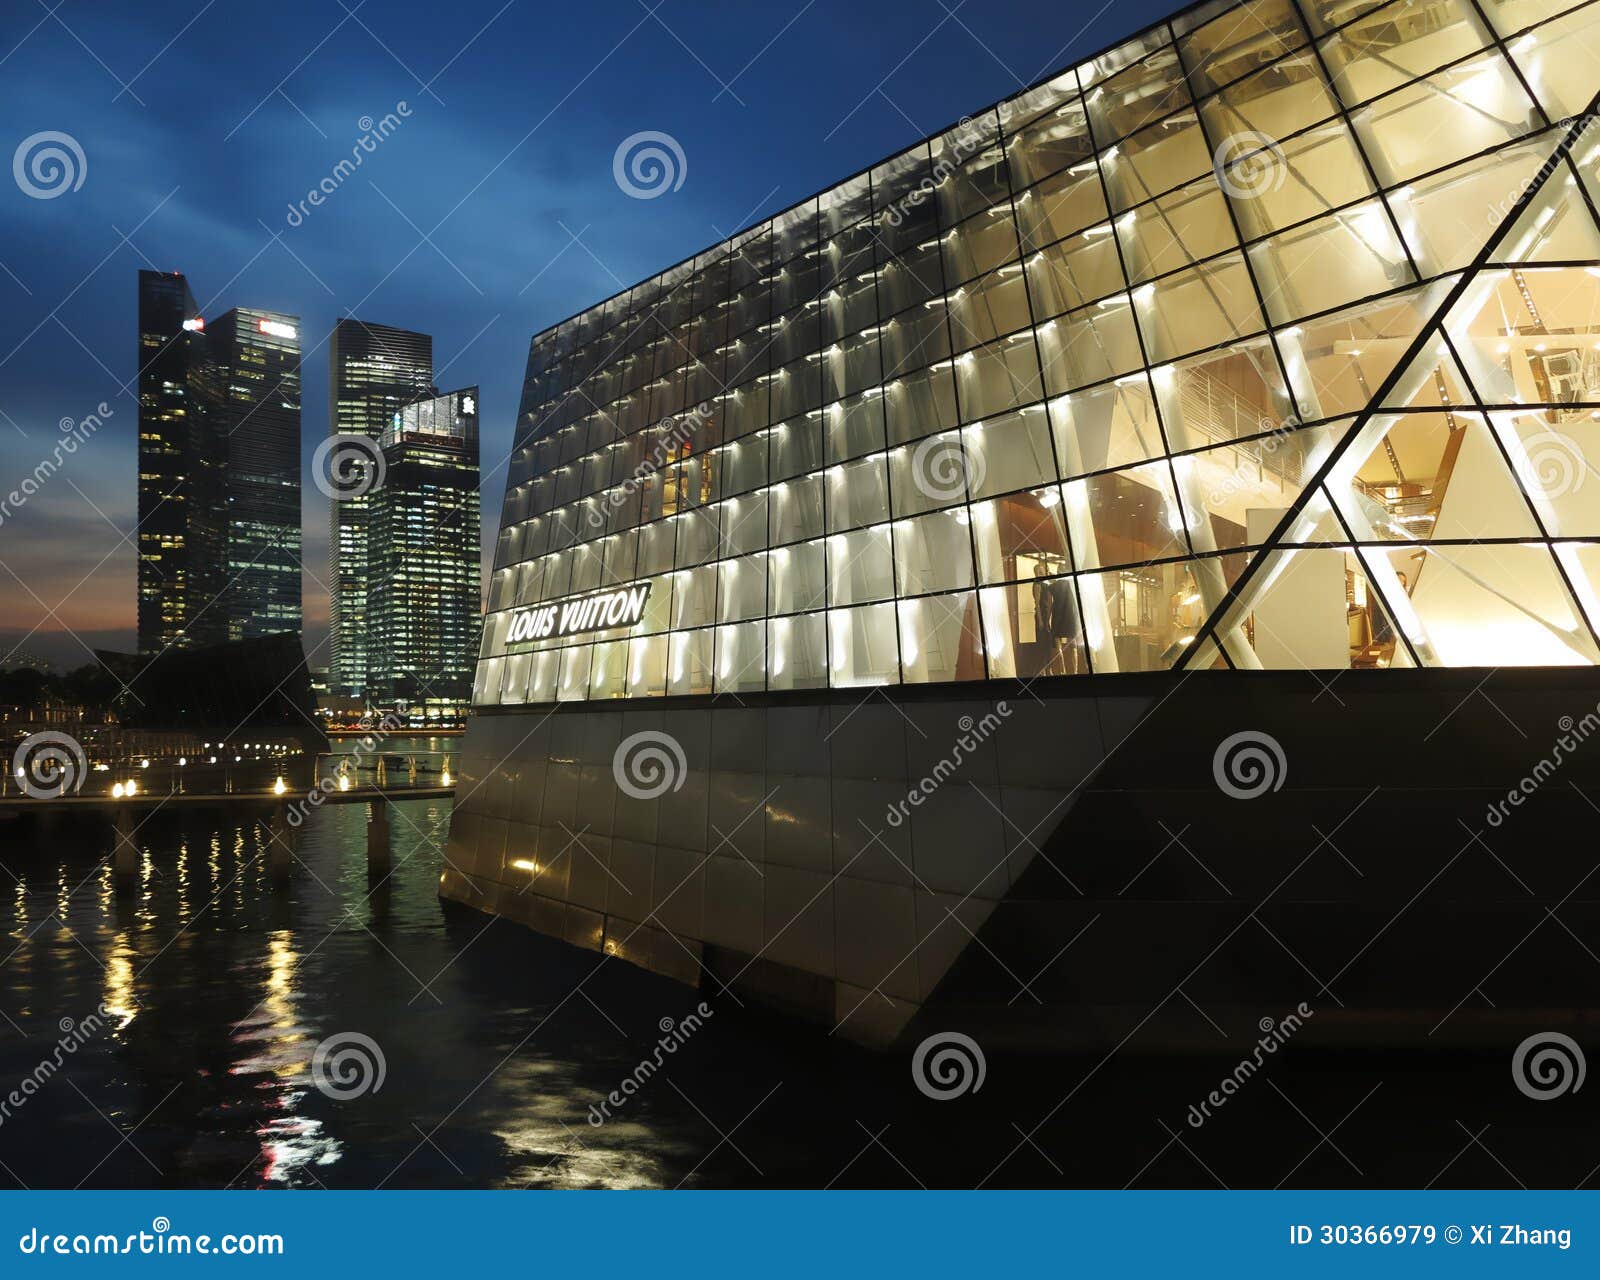 LOUIS VUITTON Flagship Store In Singapore Editorial Stock Image - Image: 30366979